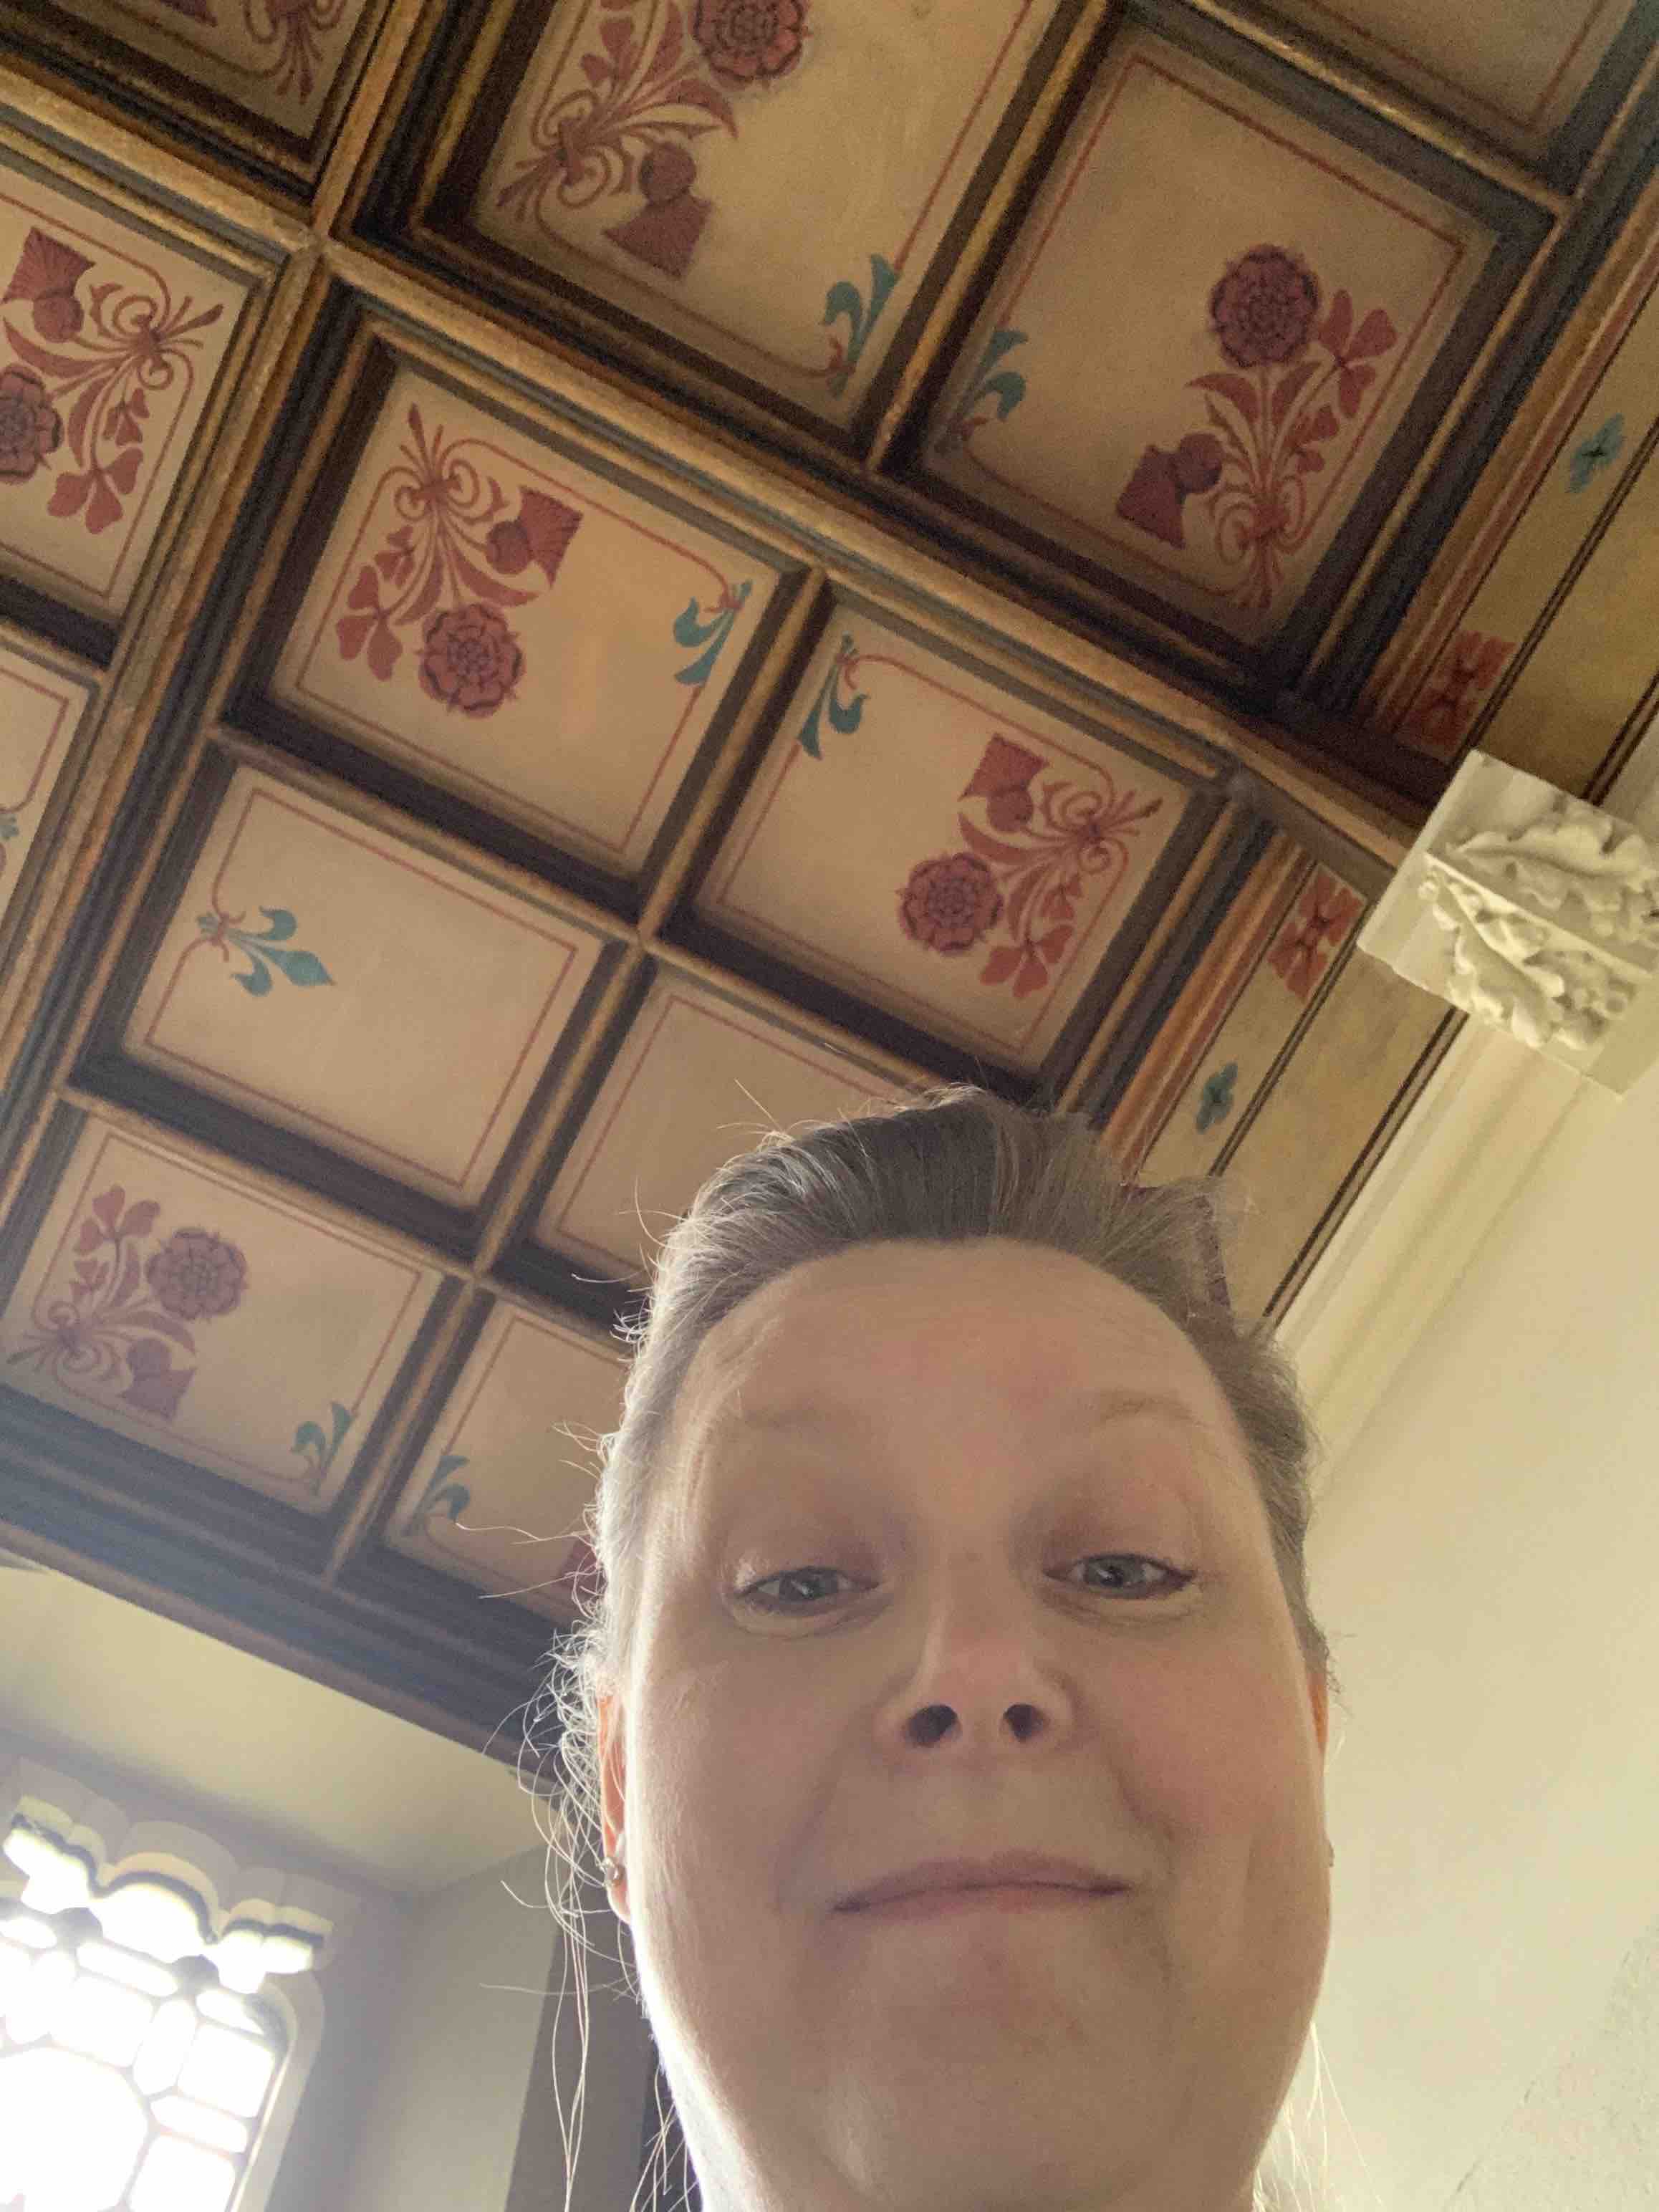 Selfie with the painted zinc ceiling of  the Maughan Library in the background